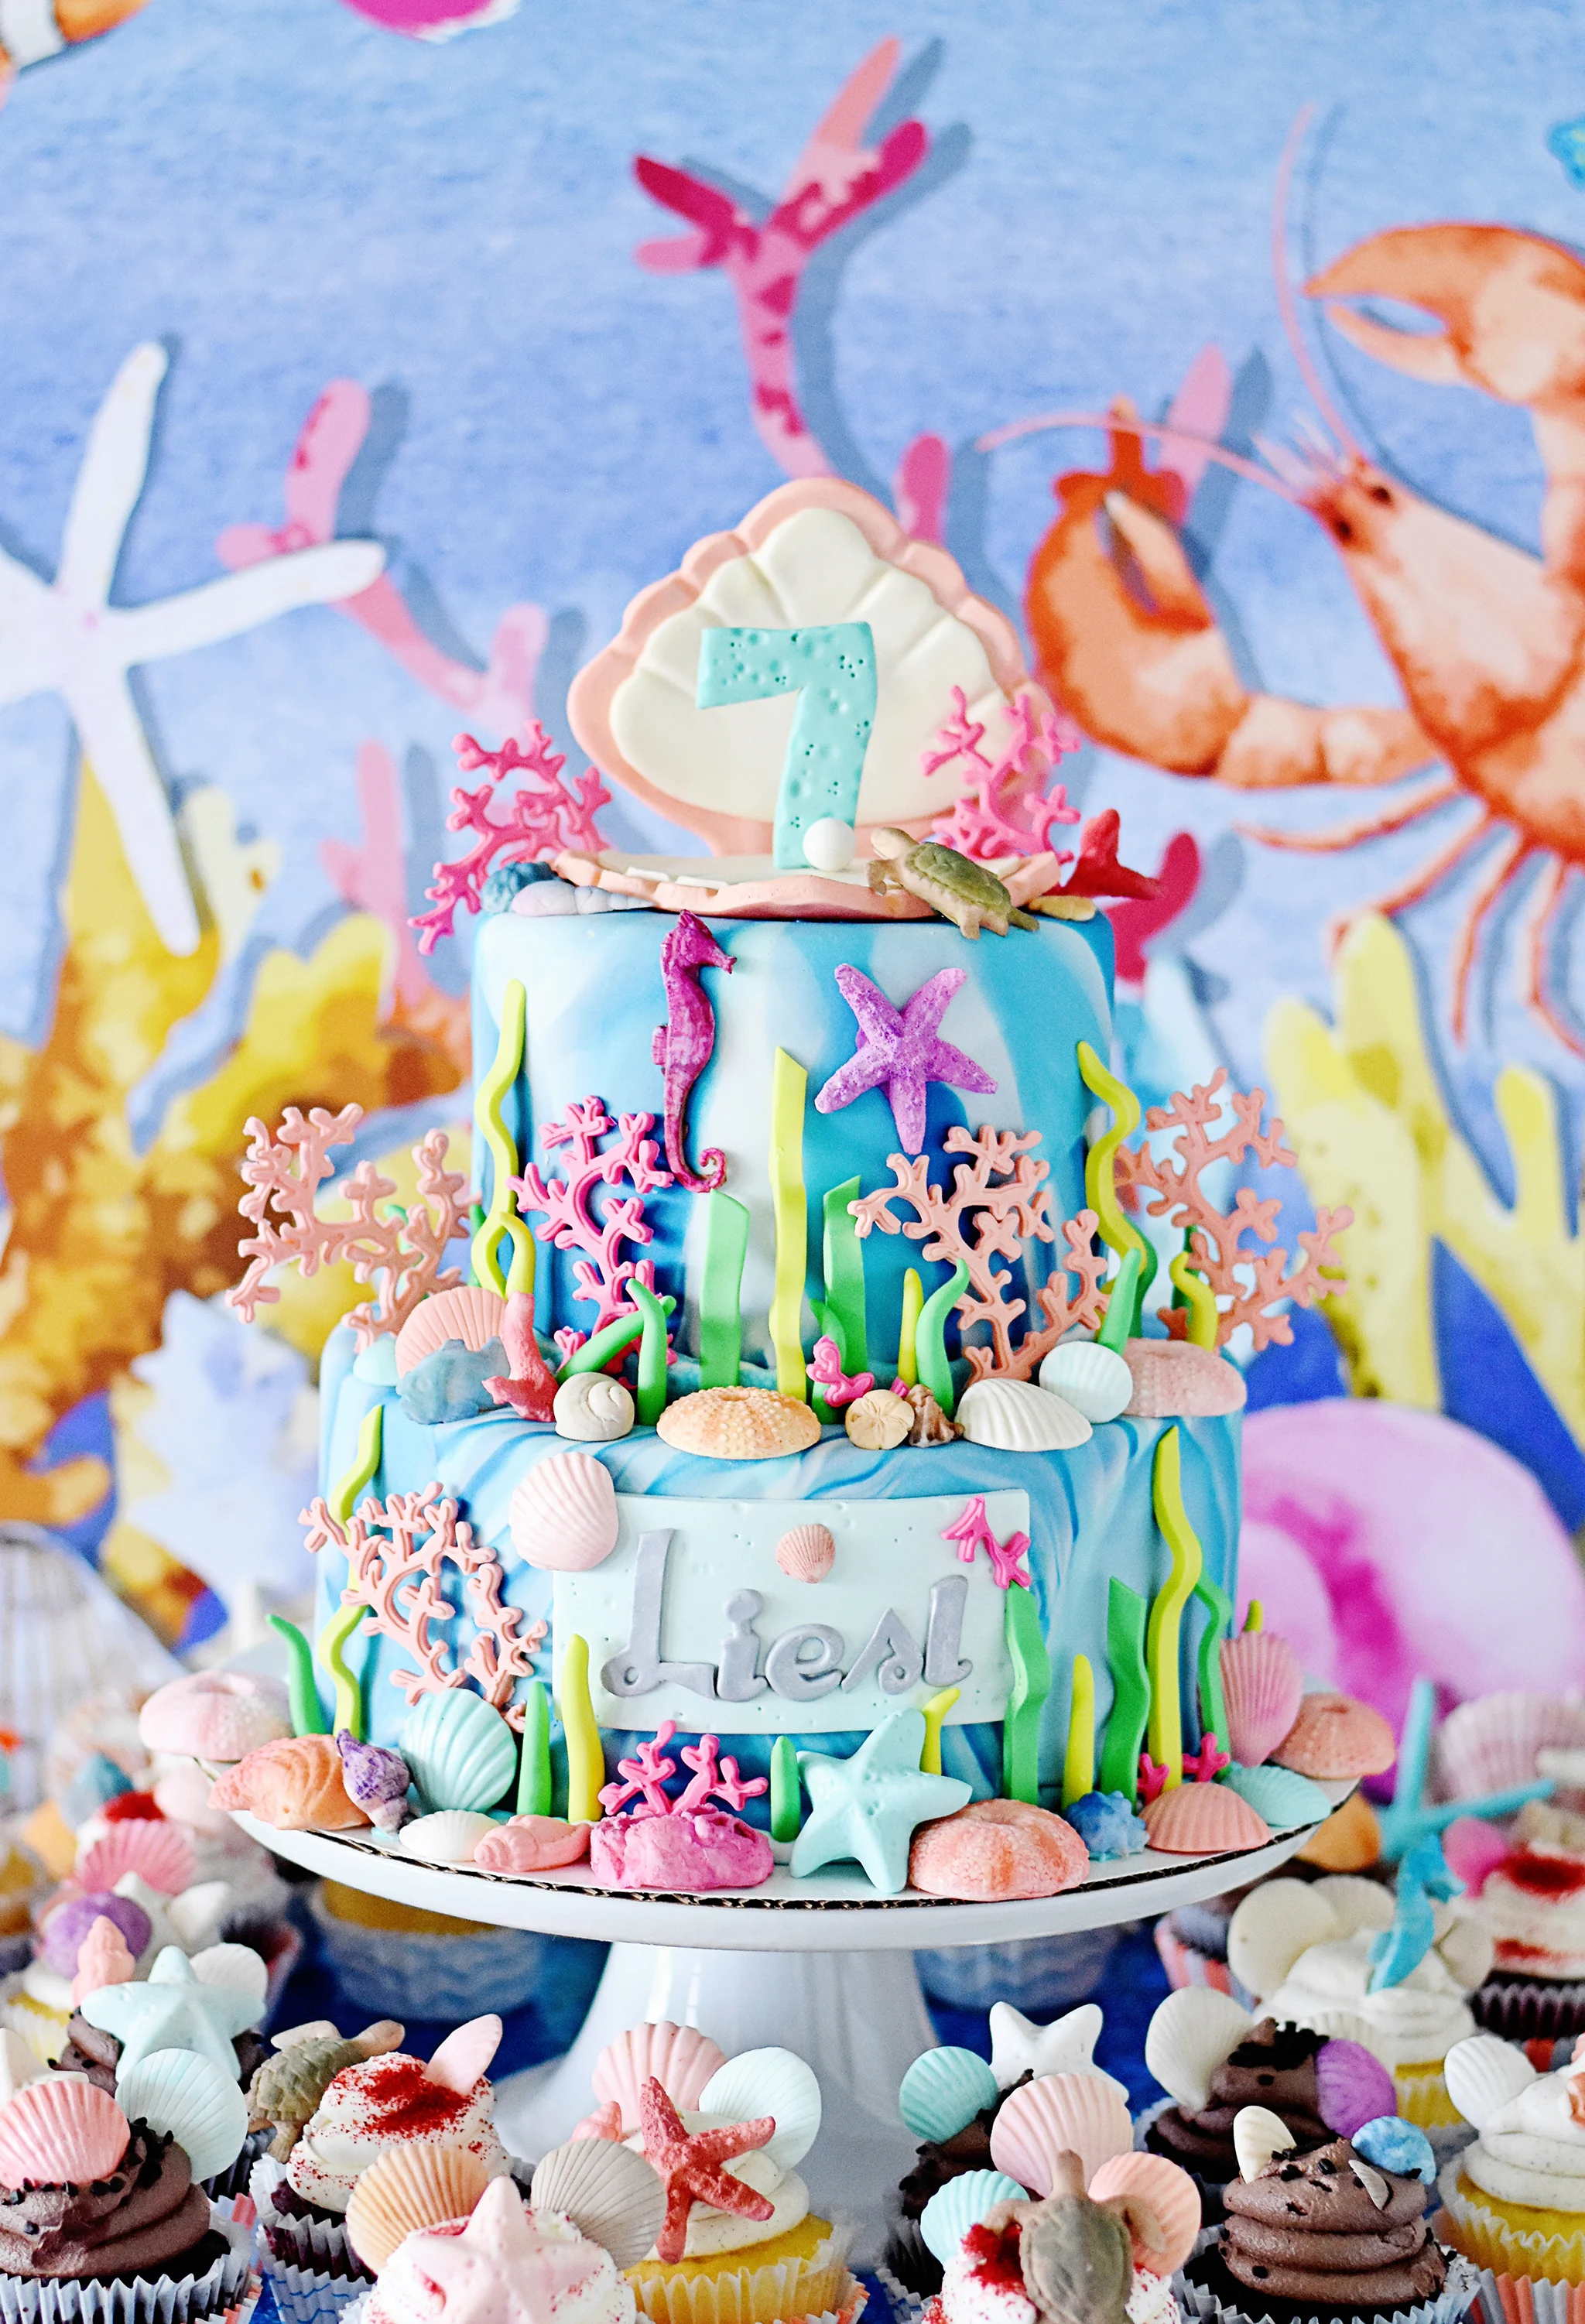 Plan a Fin-tastic Under the Sea Party! - Project Nursery